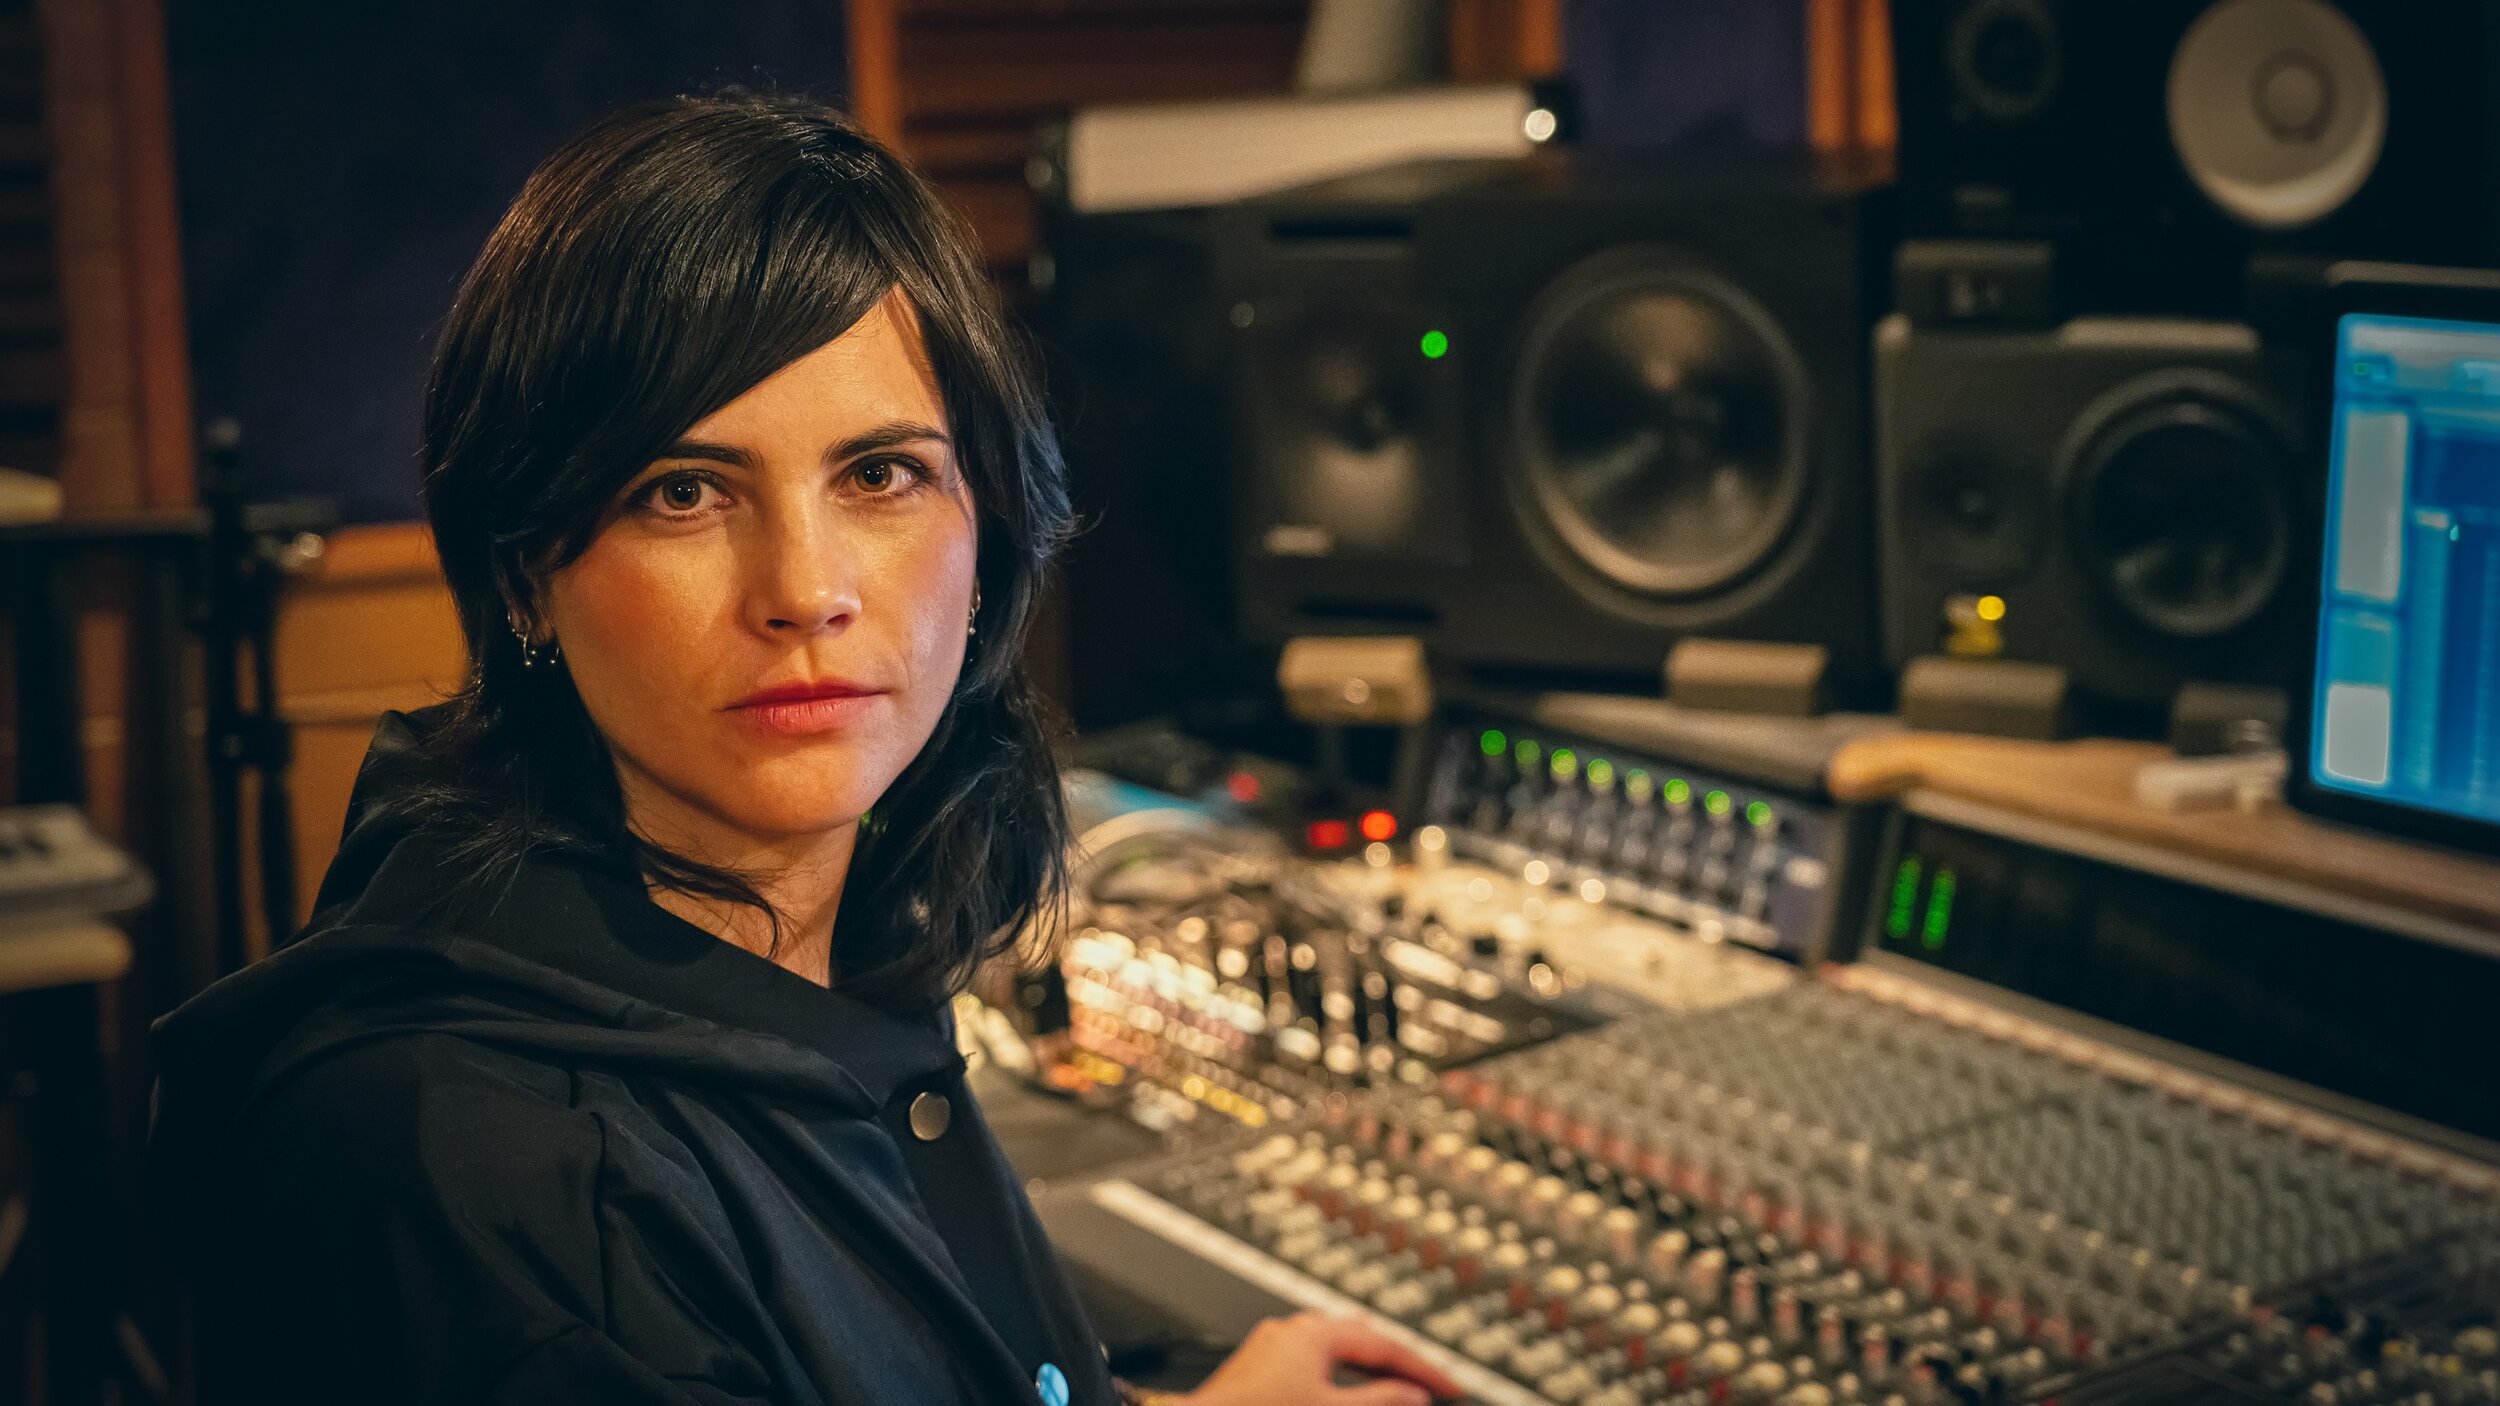 : INTERVIEW - Maria Elisa Ayerbe on Grammy Nominations, Recording During A Pandemic, and the Vanguard V4